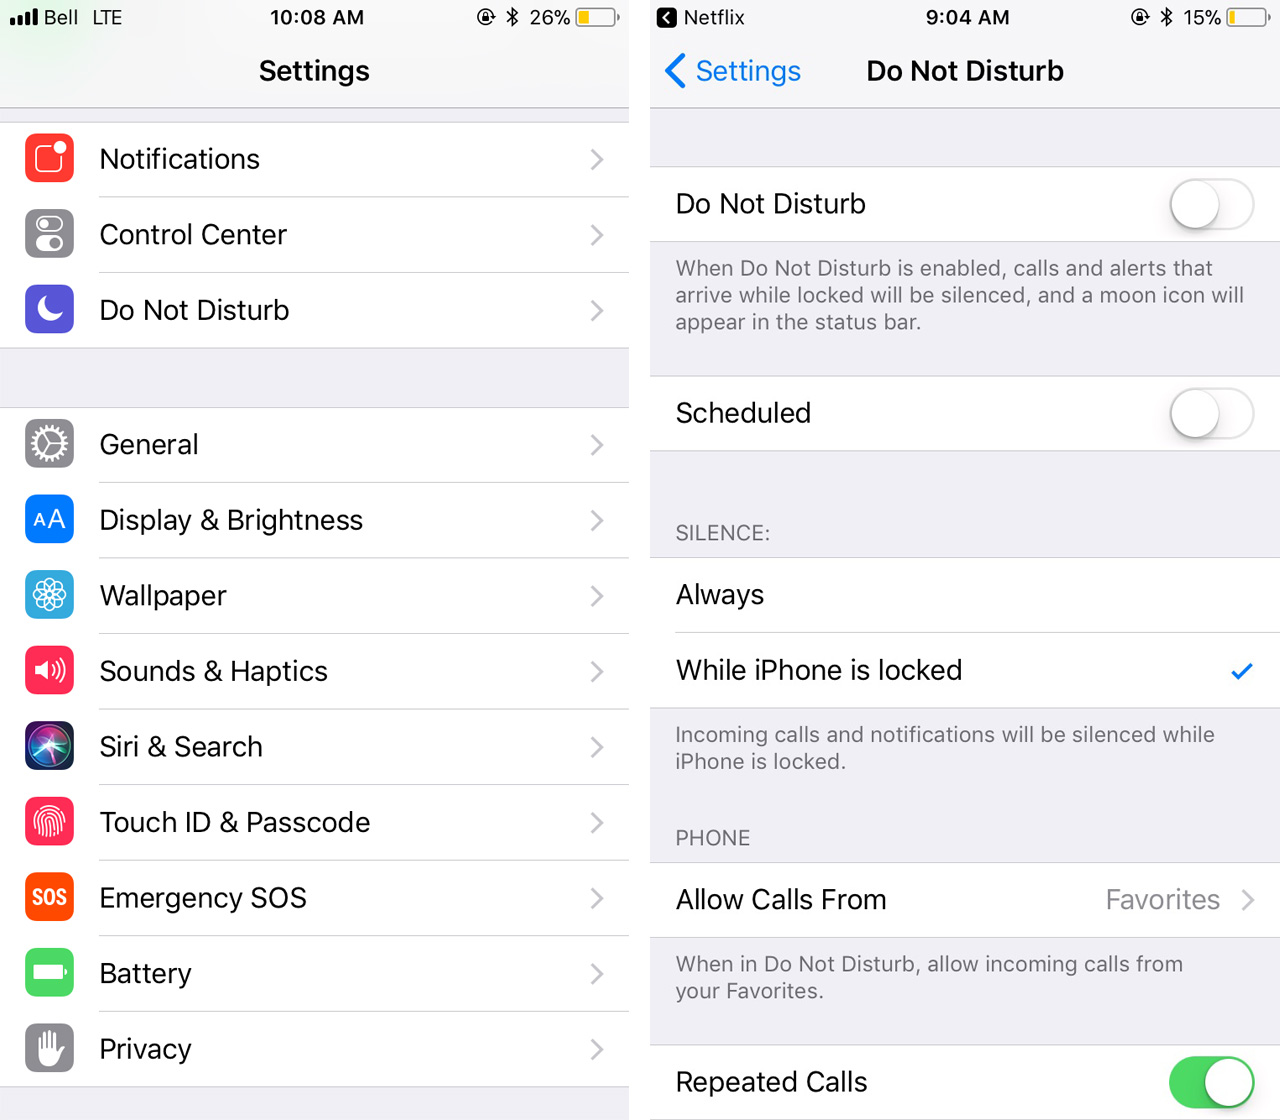 An image of the settings menu and the Do Not Disturb menu